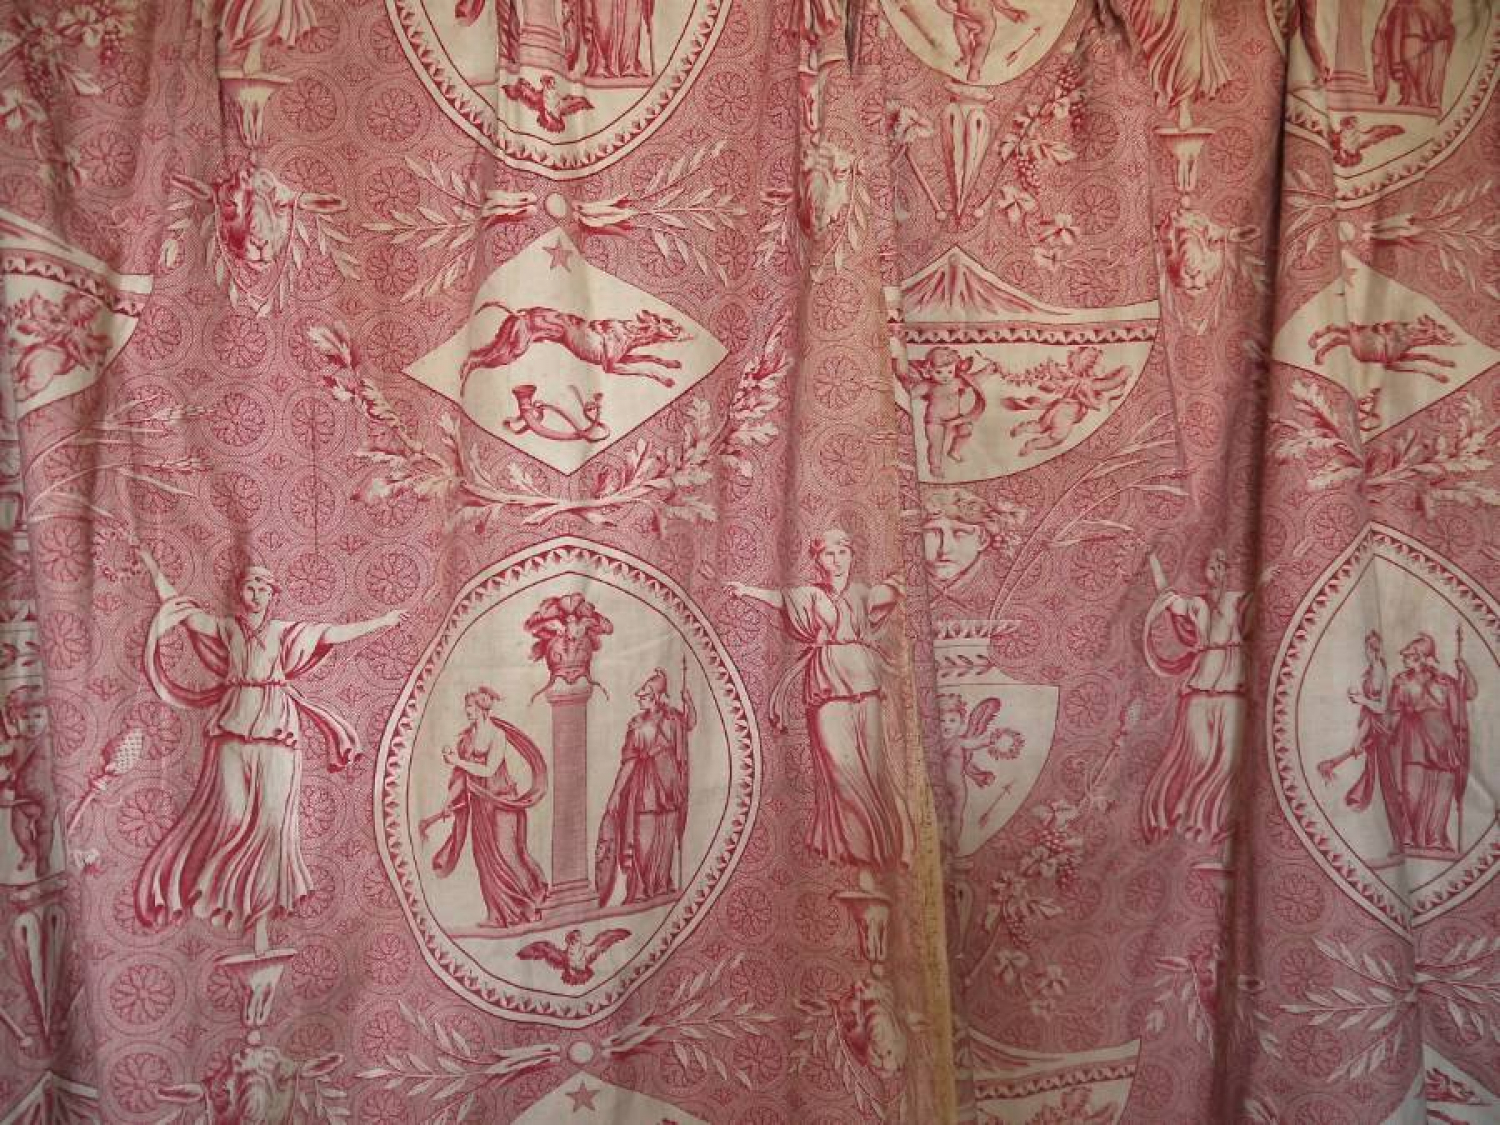 A pair of Toile de Jouy Curtains